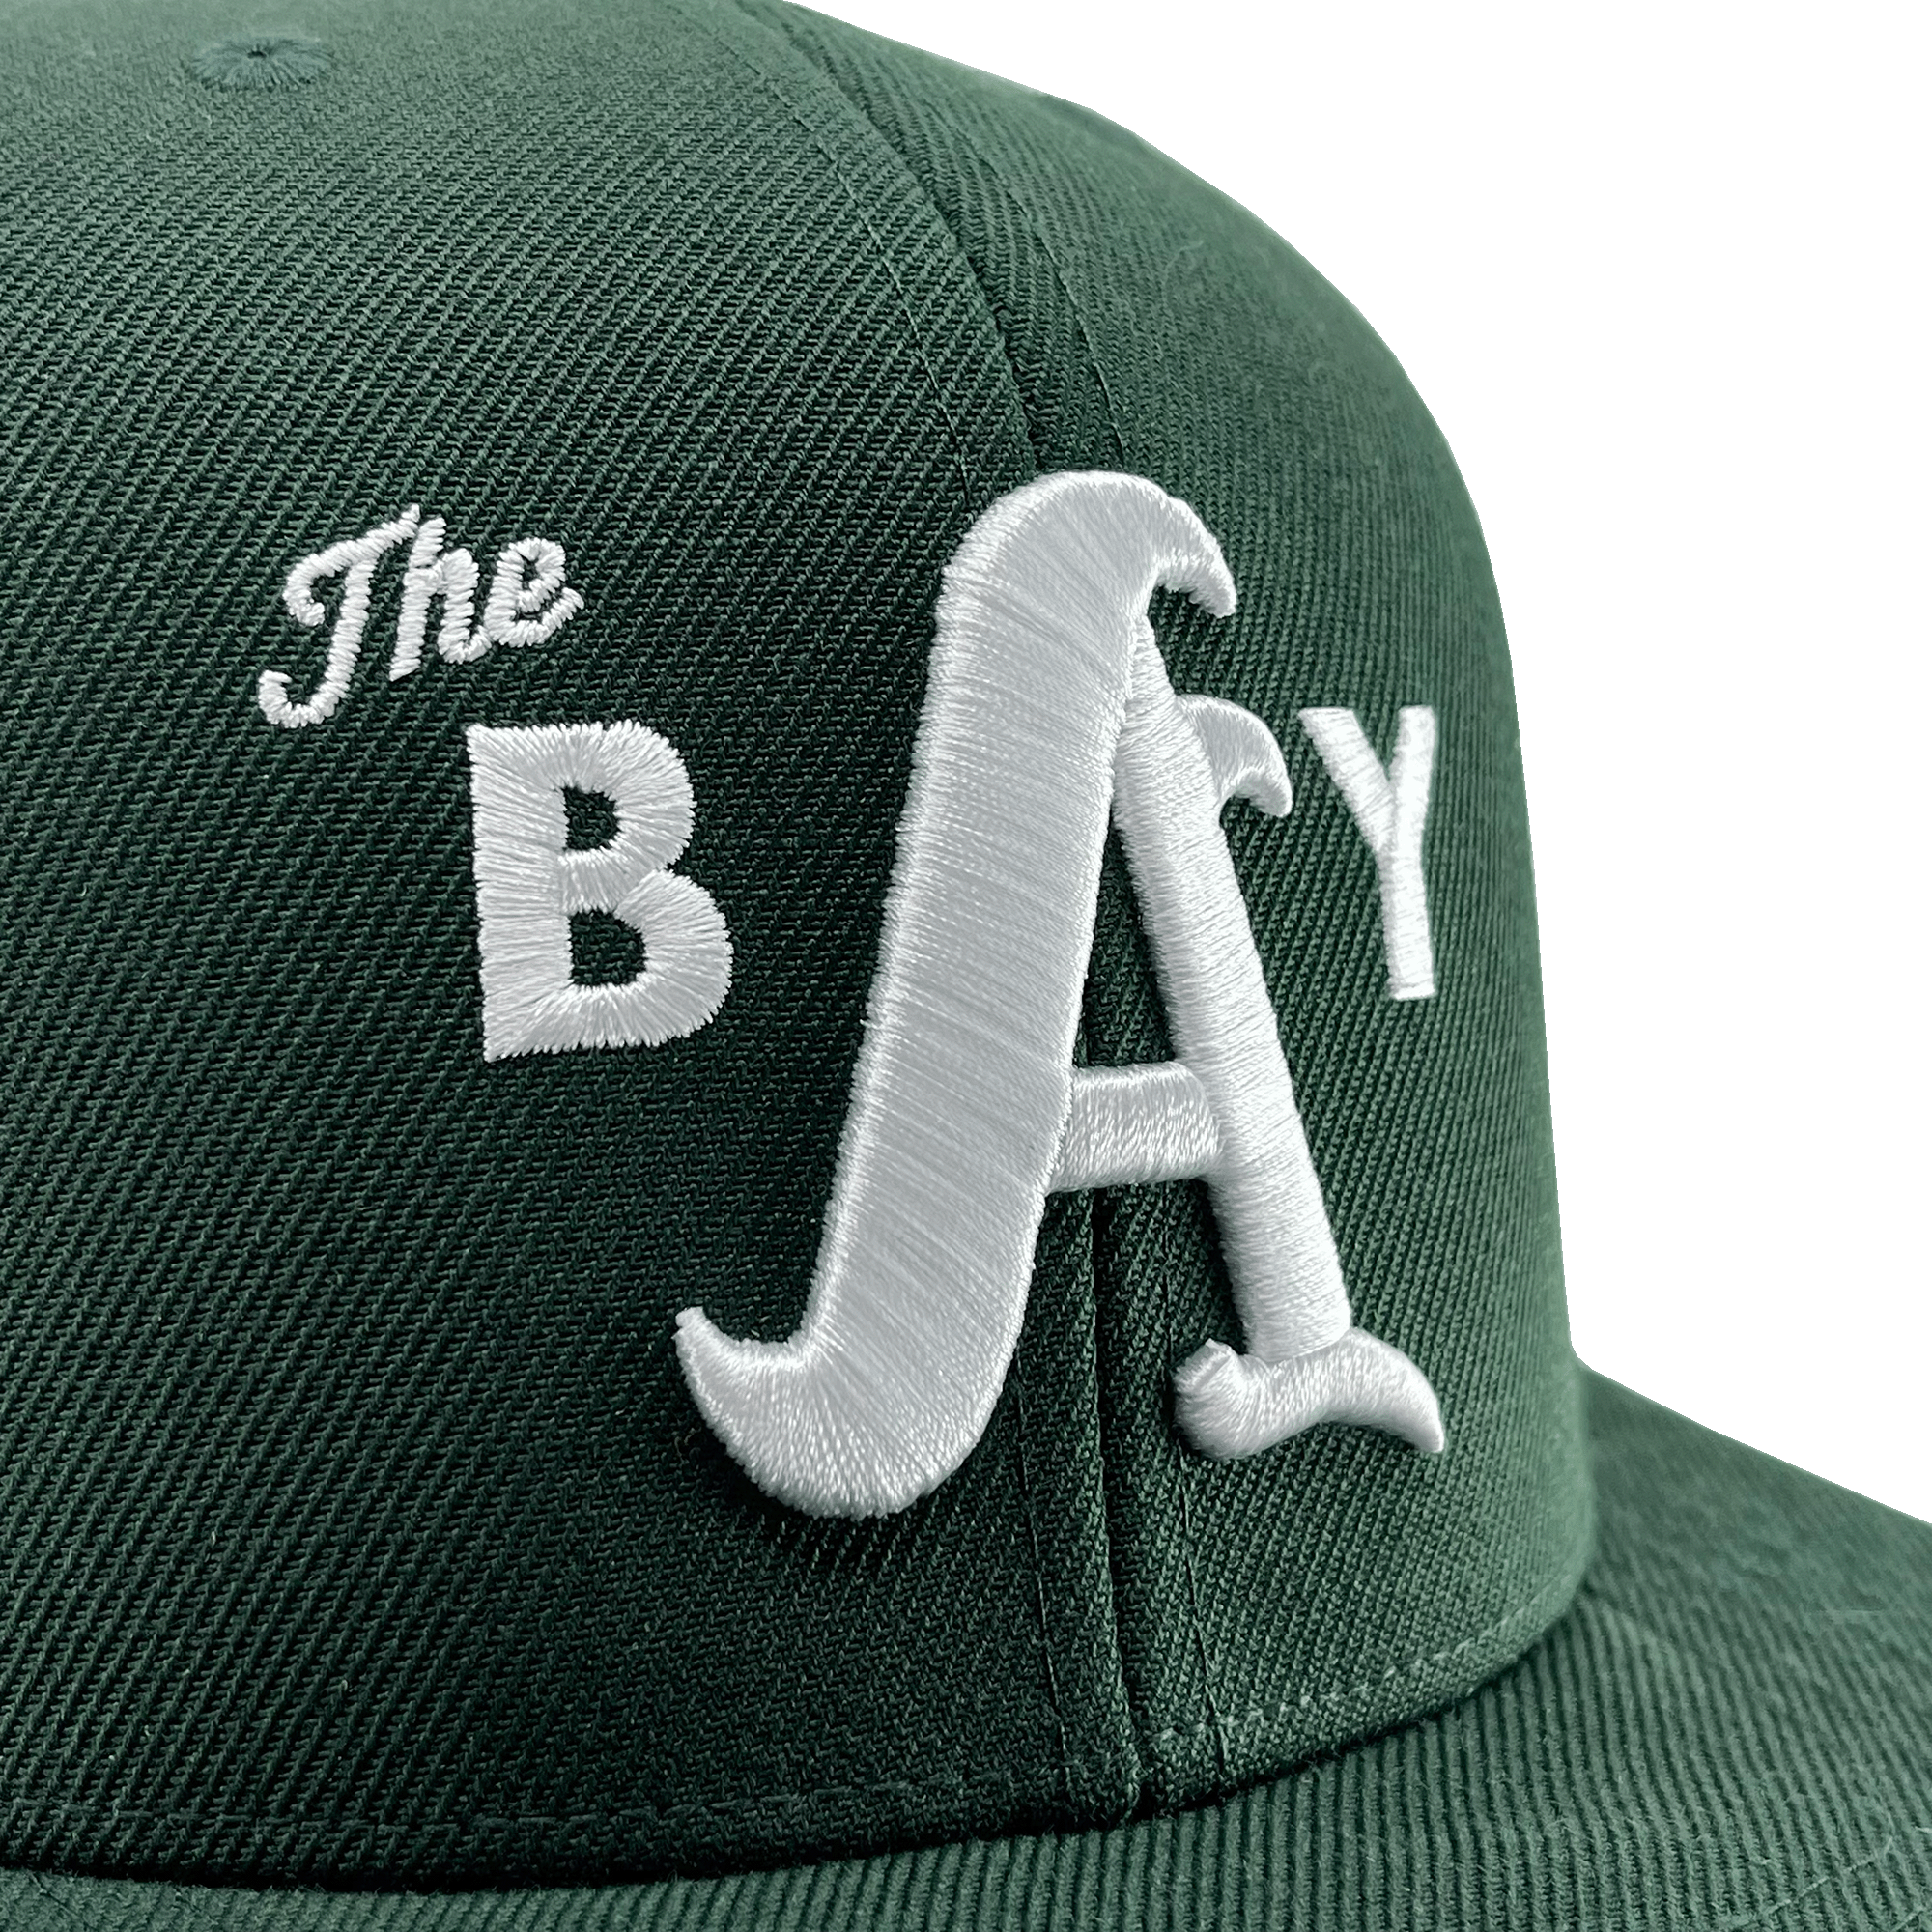 Close-up angled side view of a forest green hat with a green bill and white embroidery of the Bay logo on the front crown.